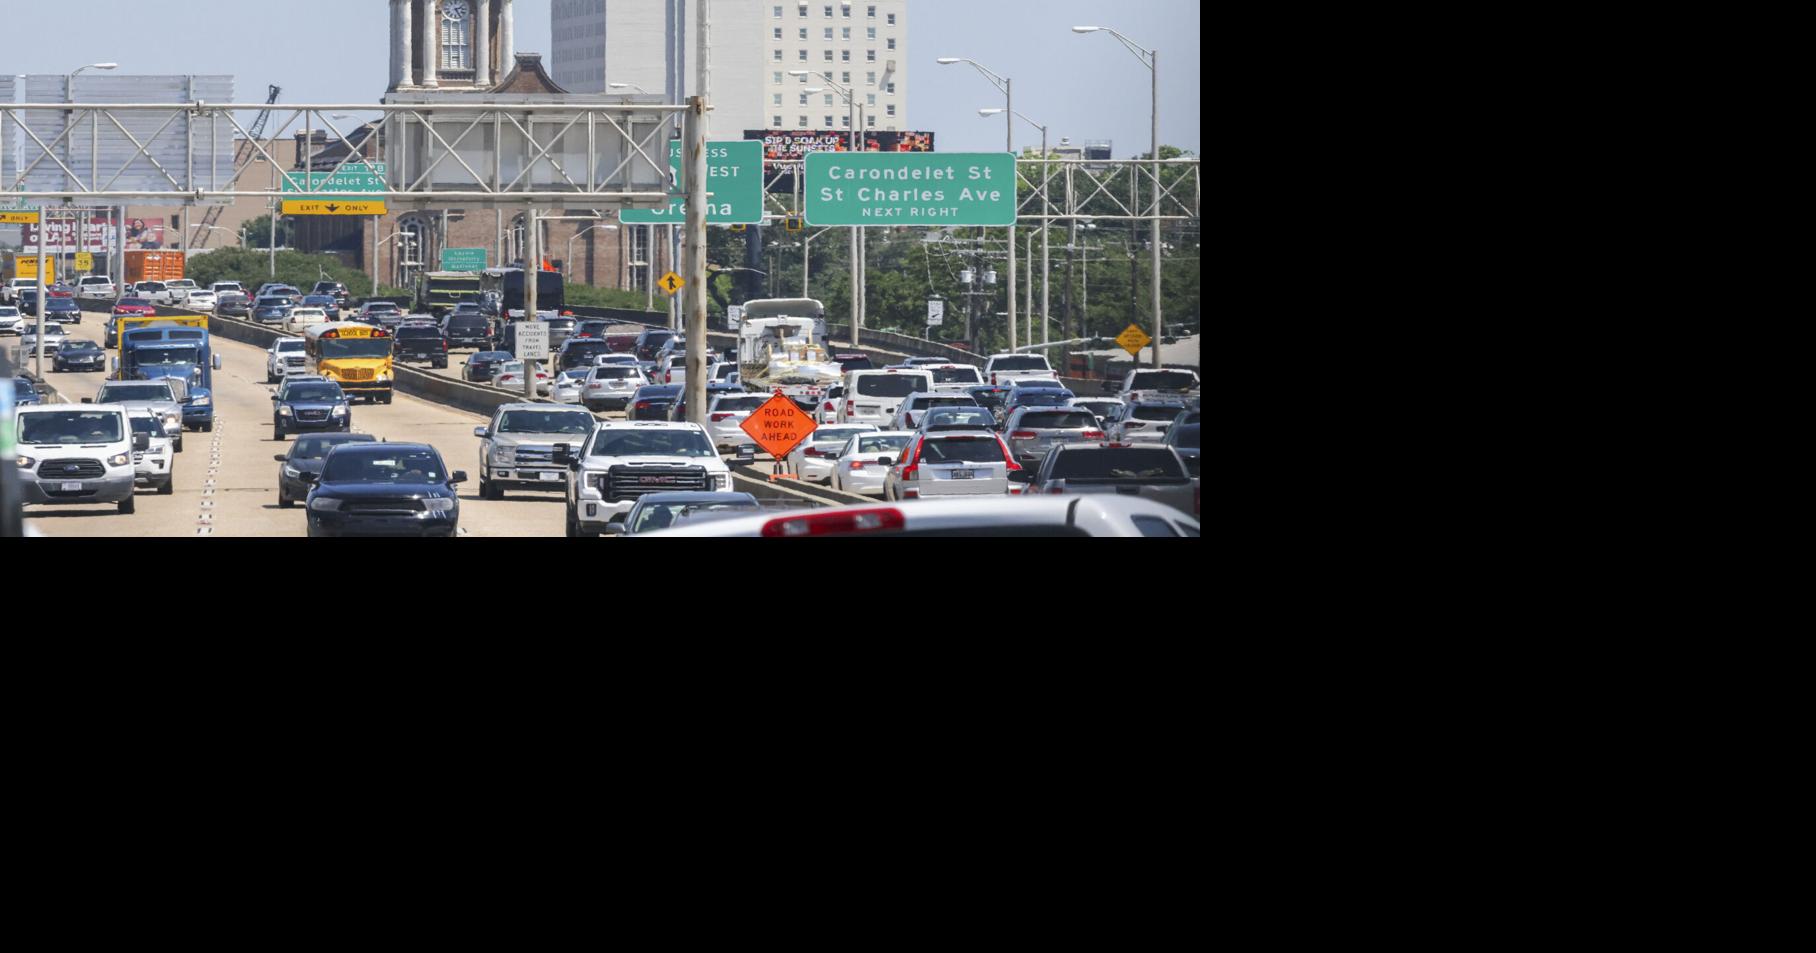 New Orleans Crescent City Connection lighting project begins; get ready for some traffic issues